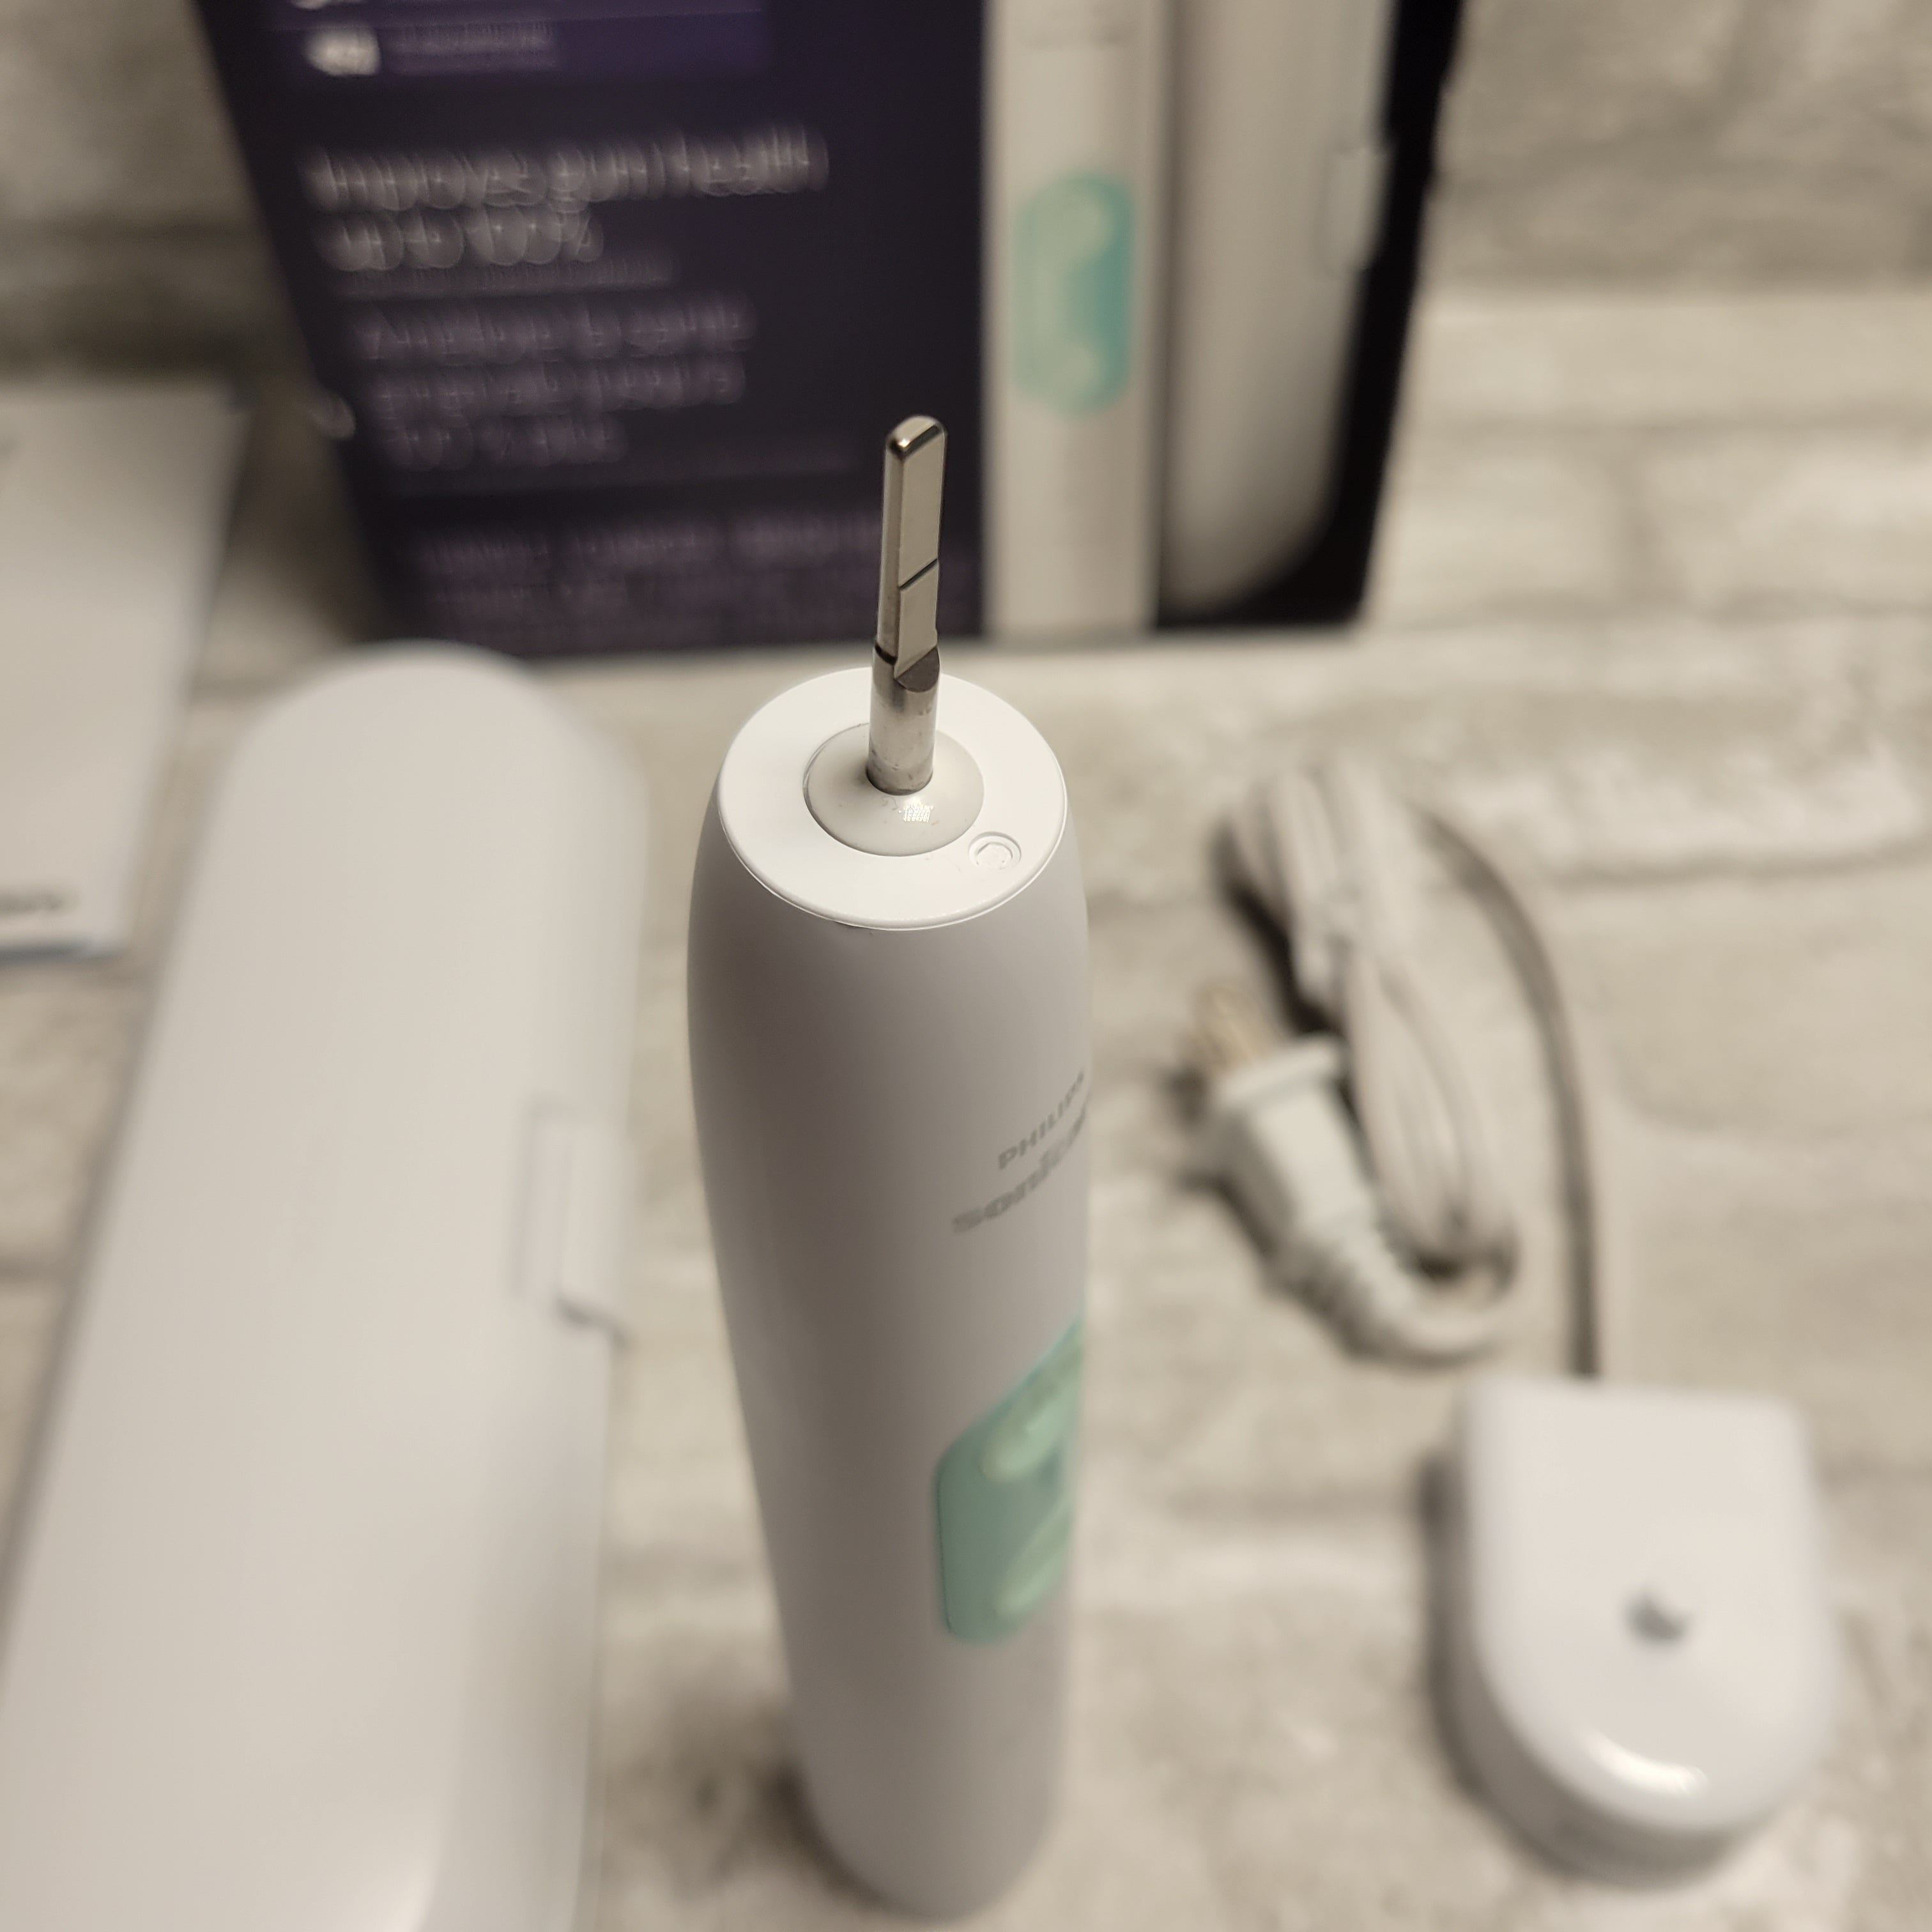 Philips Sonicare Protective Clean 5100 Rechargeable Electric Toothbrush White (8051253051630)